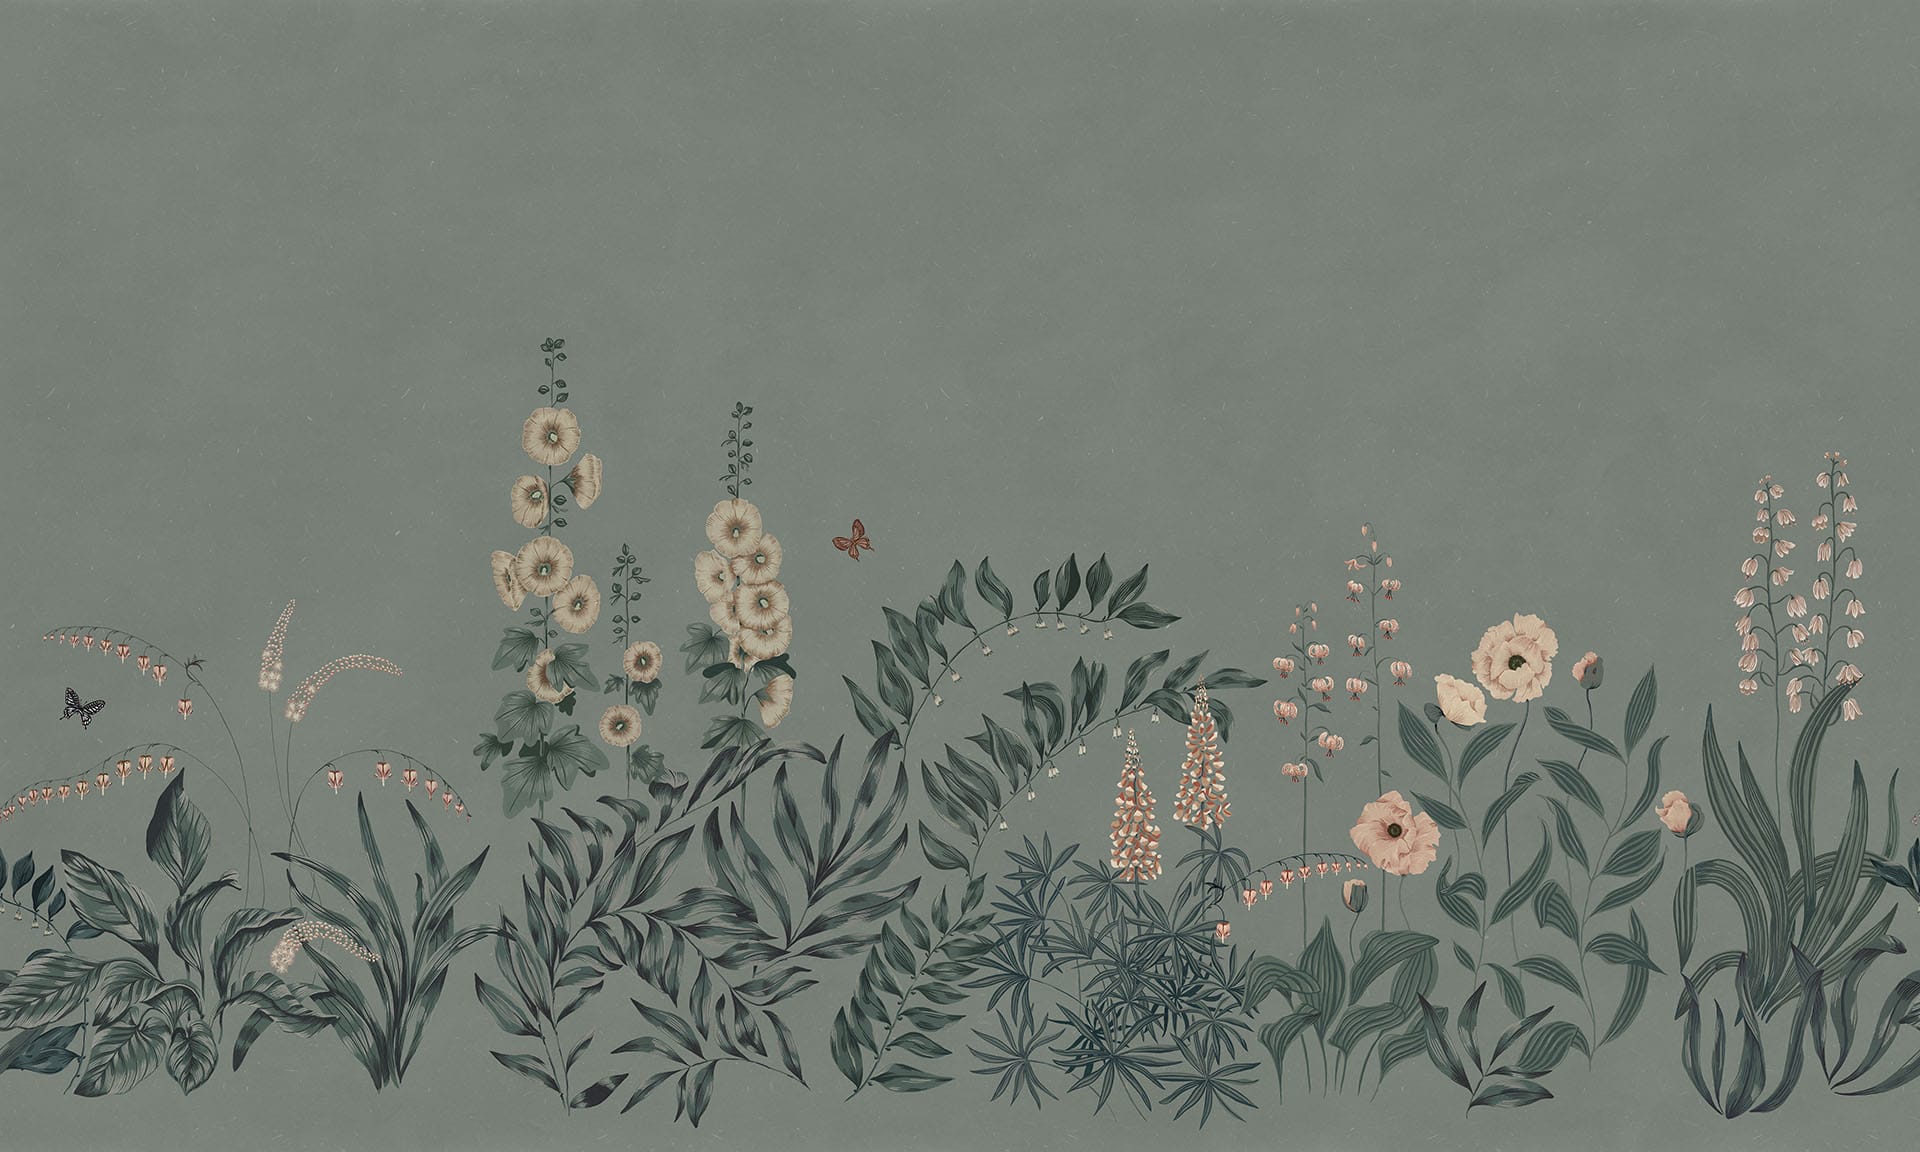 A digital wallpaper with a grey background and a border of flowers and plants - Sage green